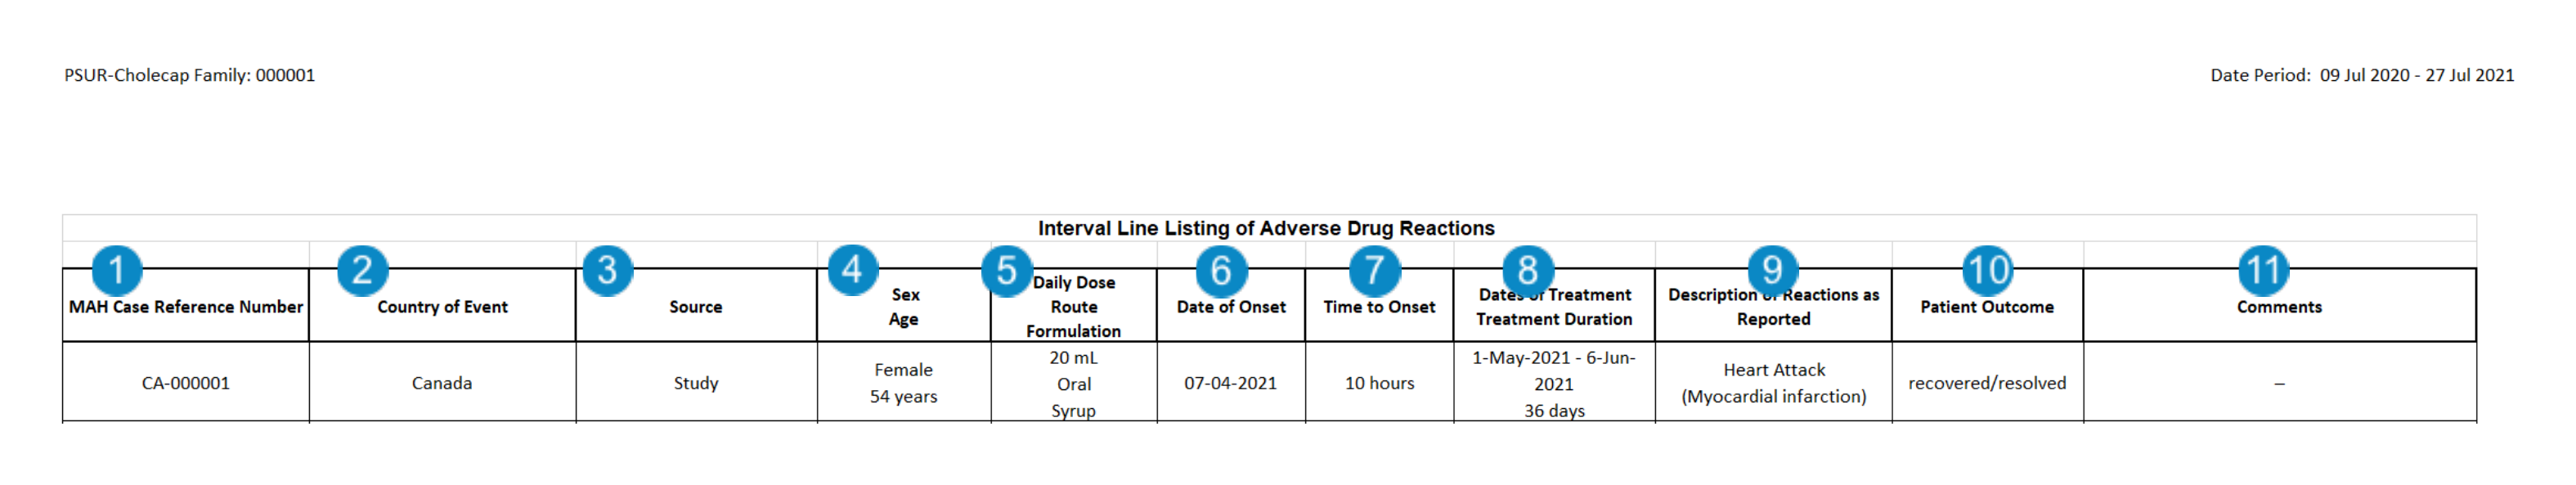 Interval Line Listing of Adverse Drug Reactions